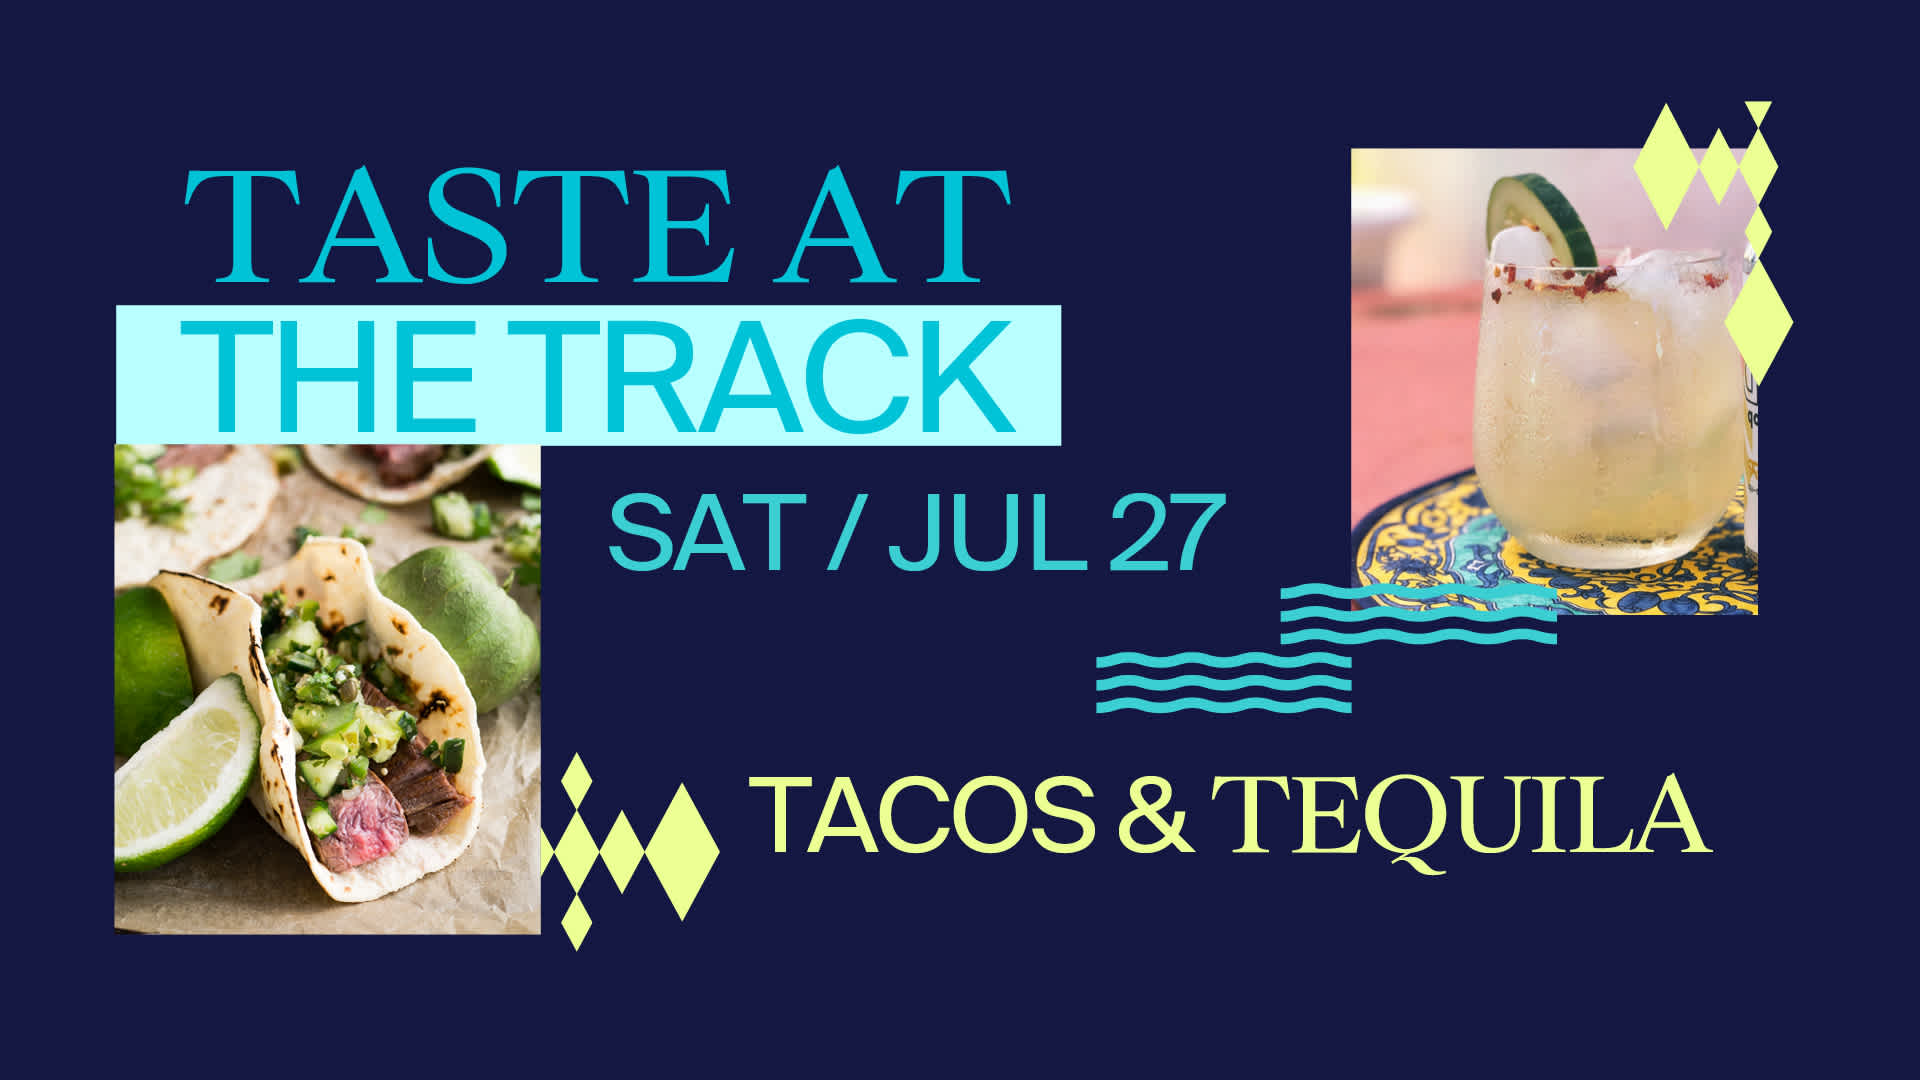 Taste at the Track - Tacos & Tequila event Gulfstream Park 